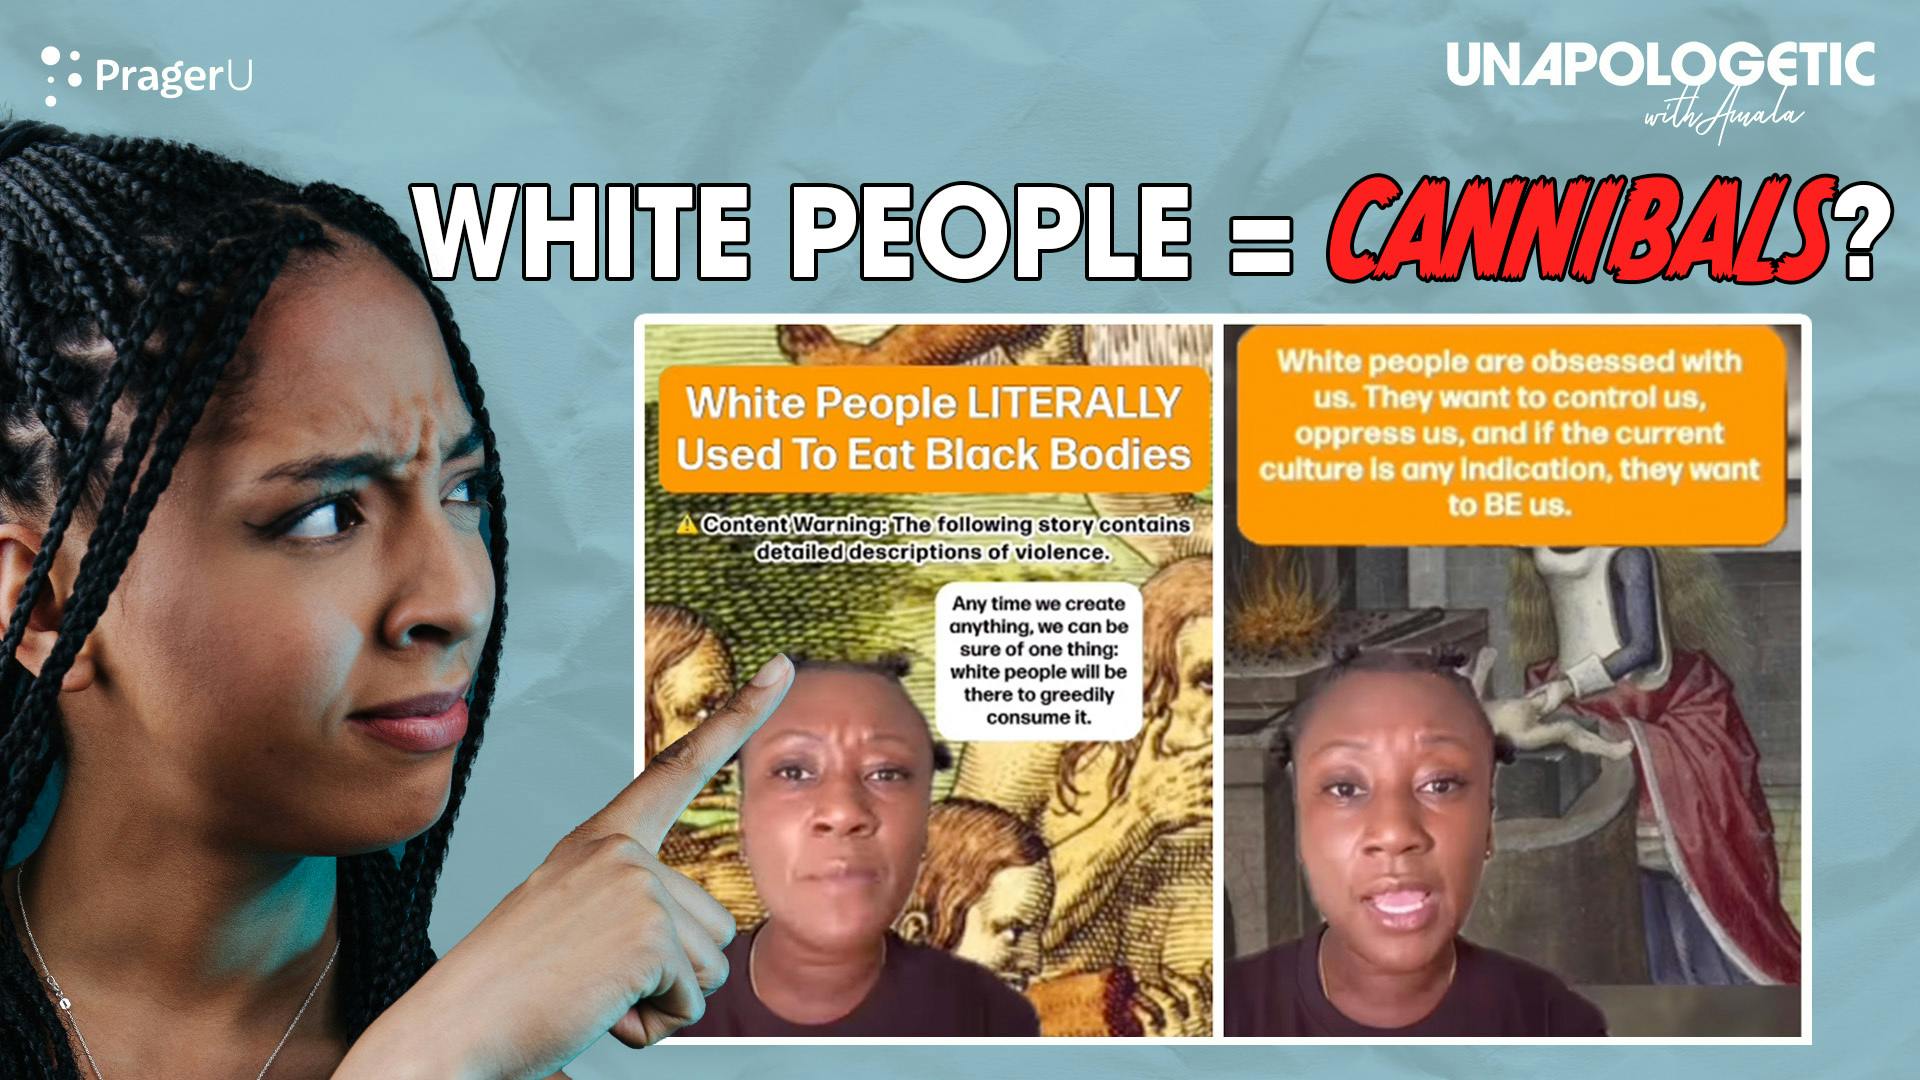 White People Cannibalize Black People?: 10/4/2022